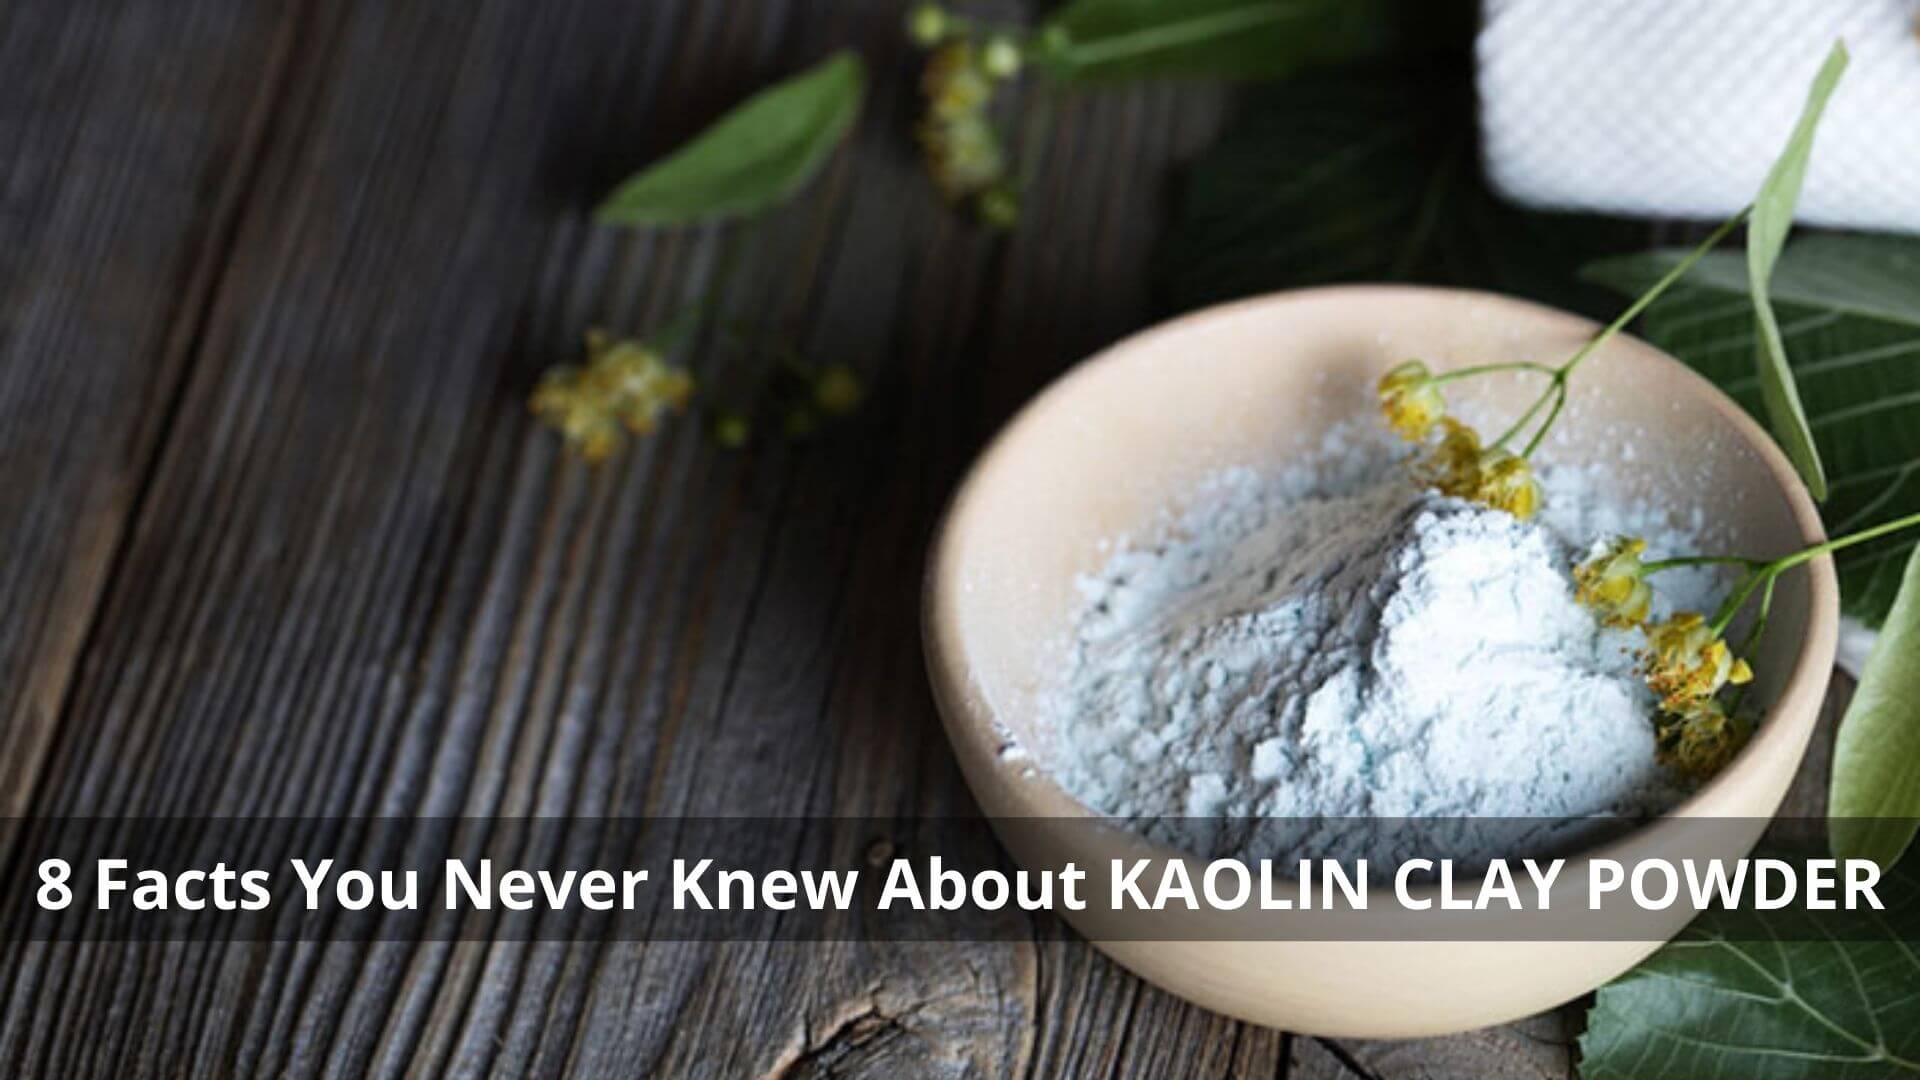 8 Facts You Never Knew About Kaolin Clay Powder